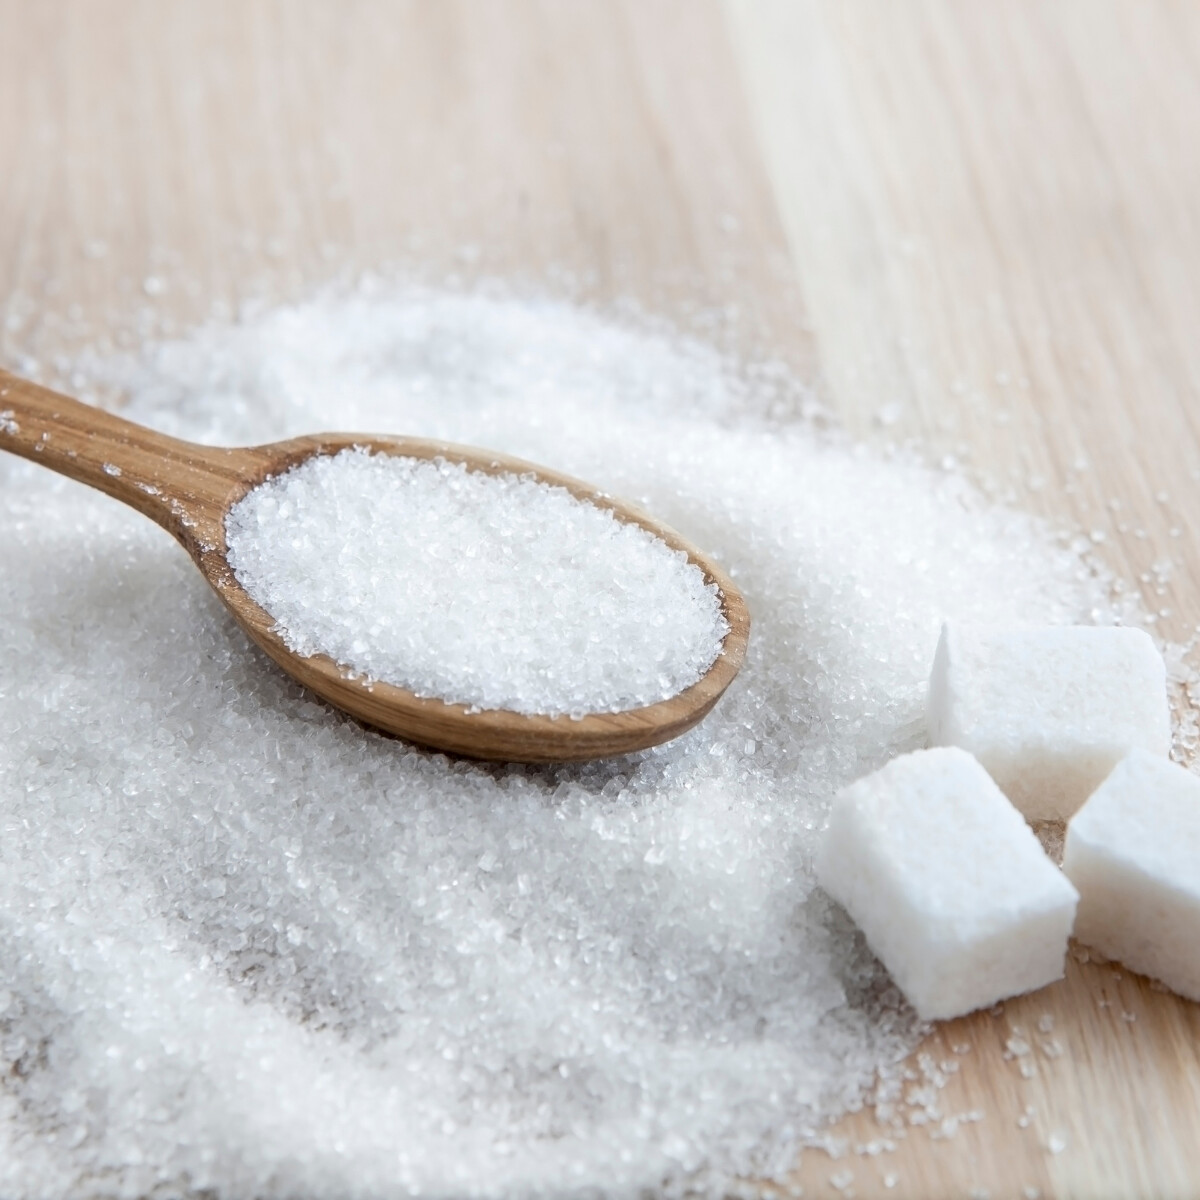 The Sugar Industry Paid Researchers to Mislead Us